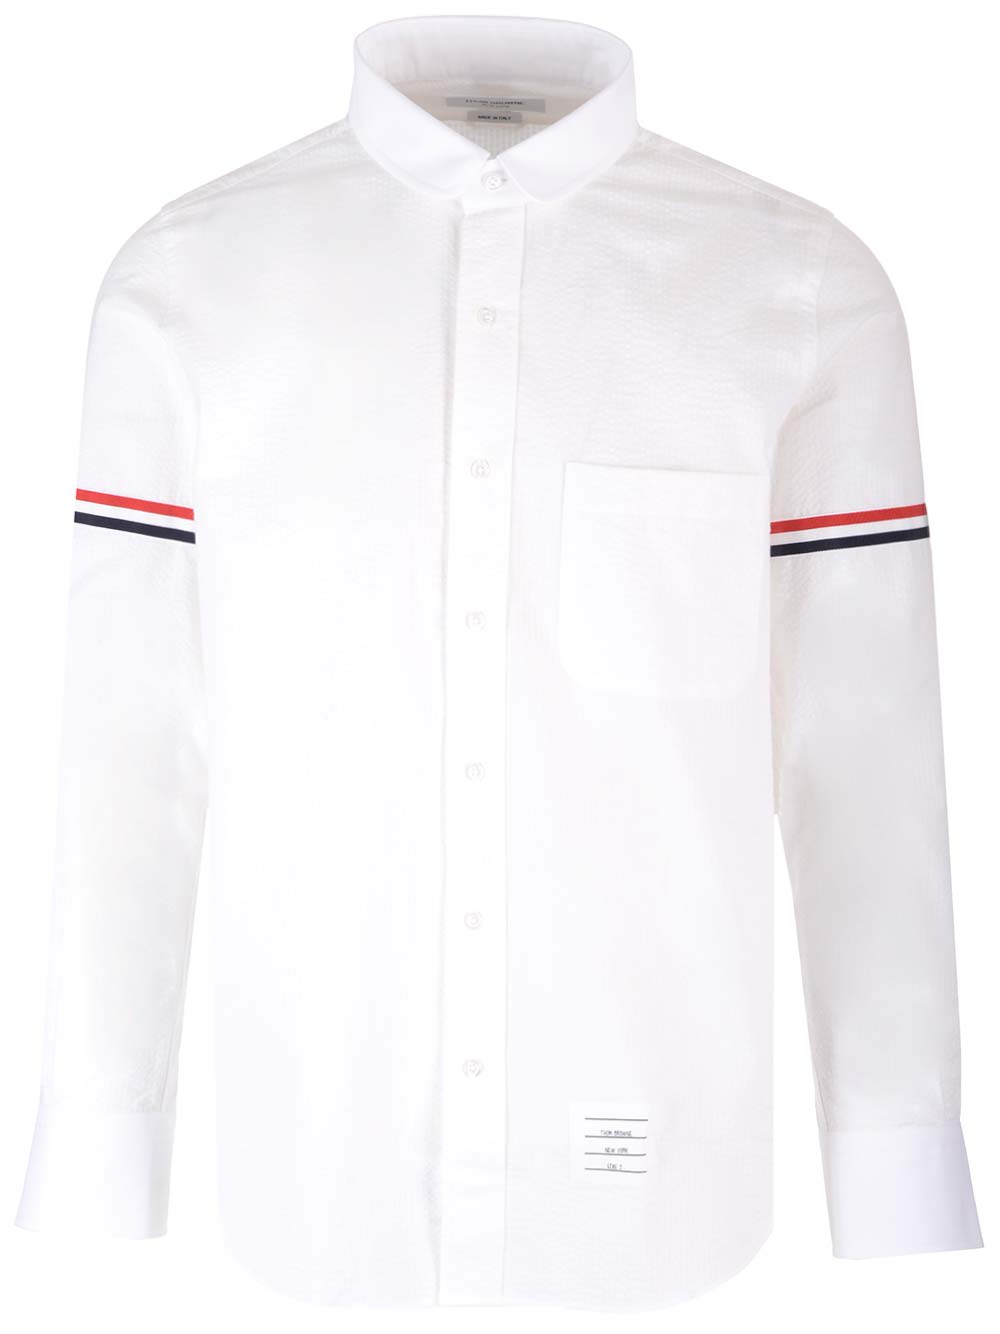 THOM BROWNE WHITE SHIRT WITH STRIPED BANDS